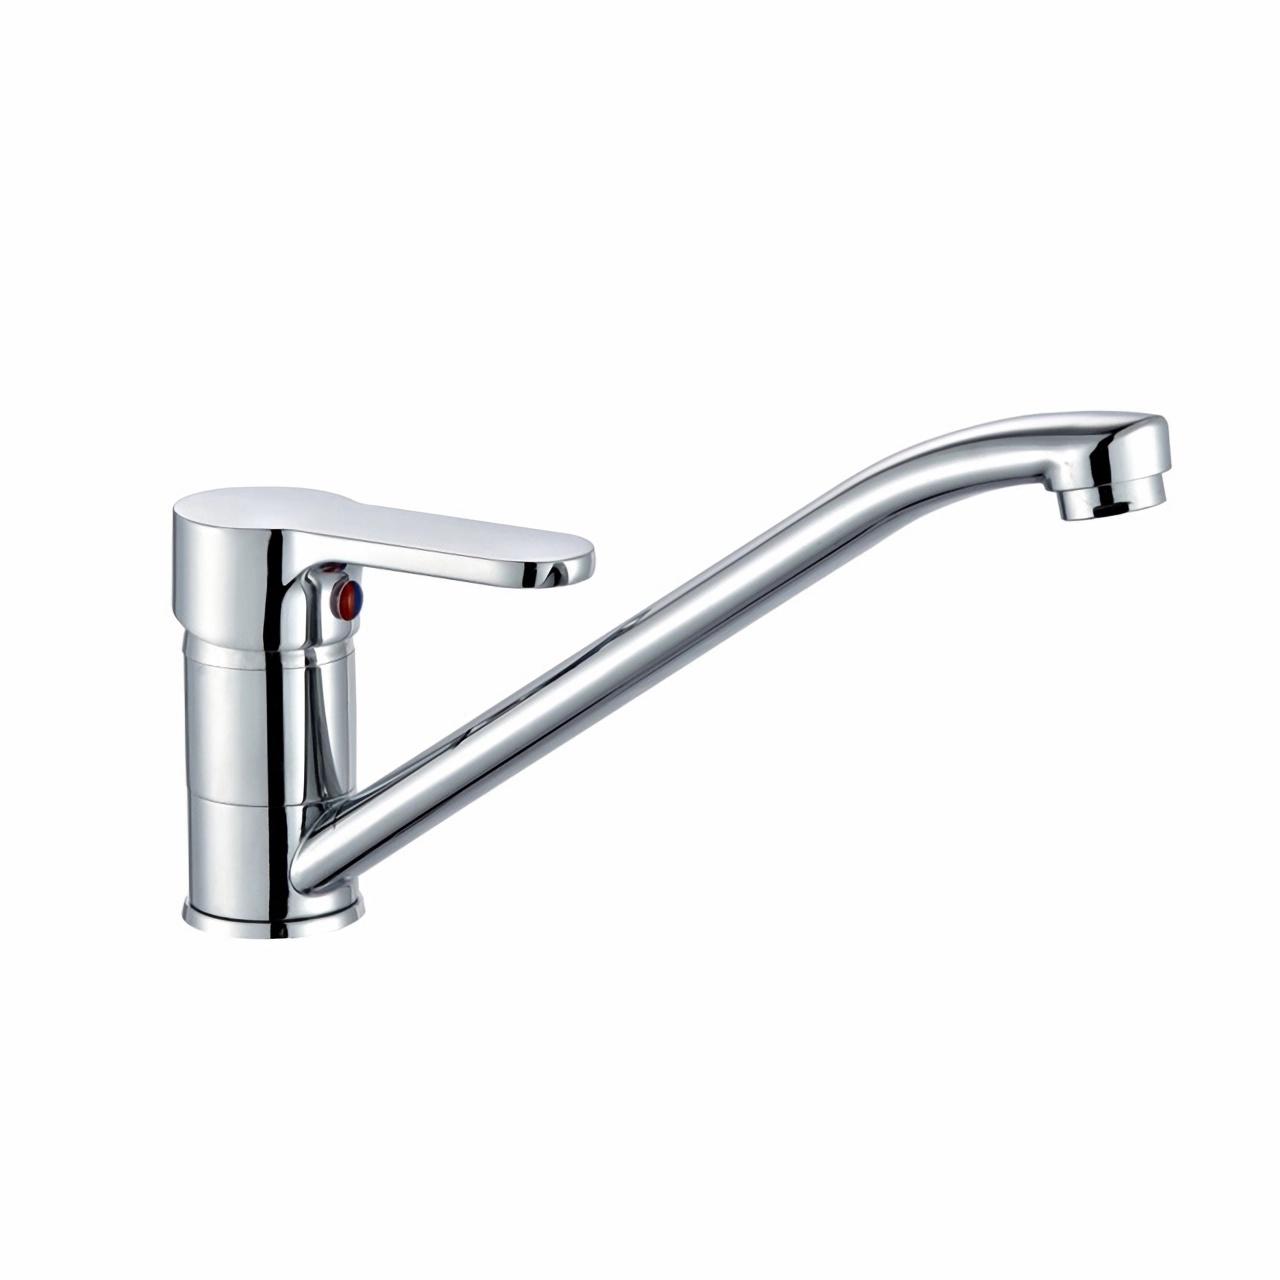 OJ-J2207H Easy to Install and Smooth Water Outlet Kitchen Sink Faucet Mixer Hot and Cold Water Single Hole Faucet Zinc Alloy Kitchen Faucet